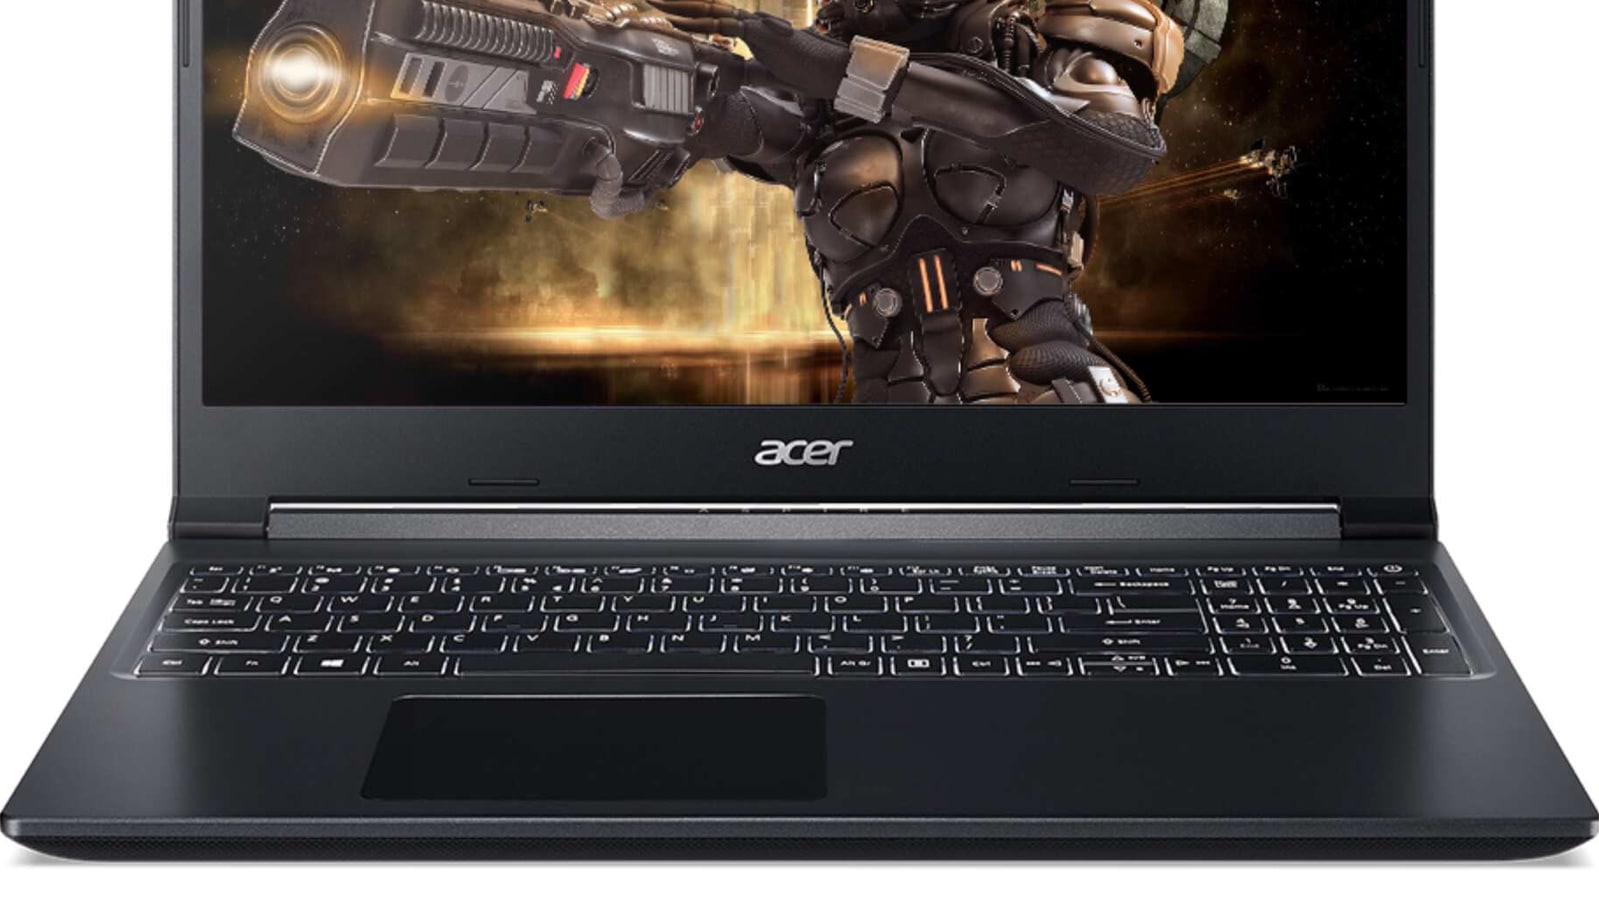 Intel, AMD based Acer Aspire 7 gaming laptop launched